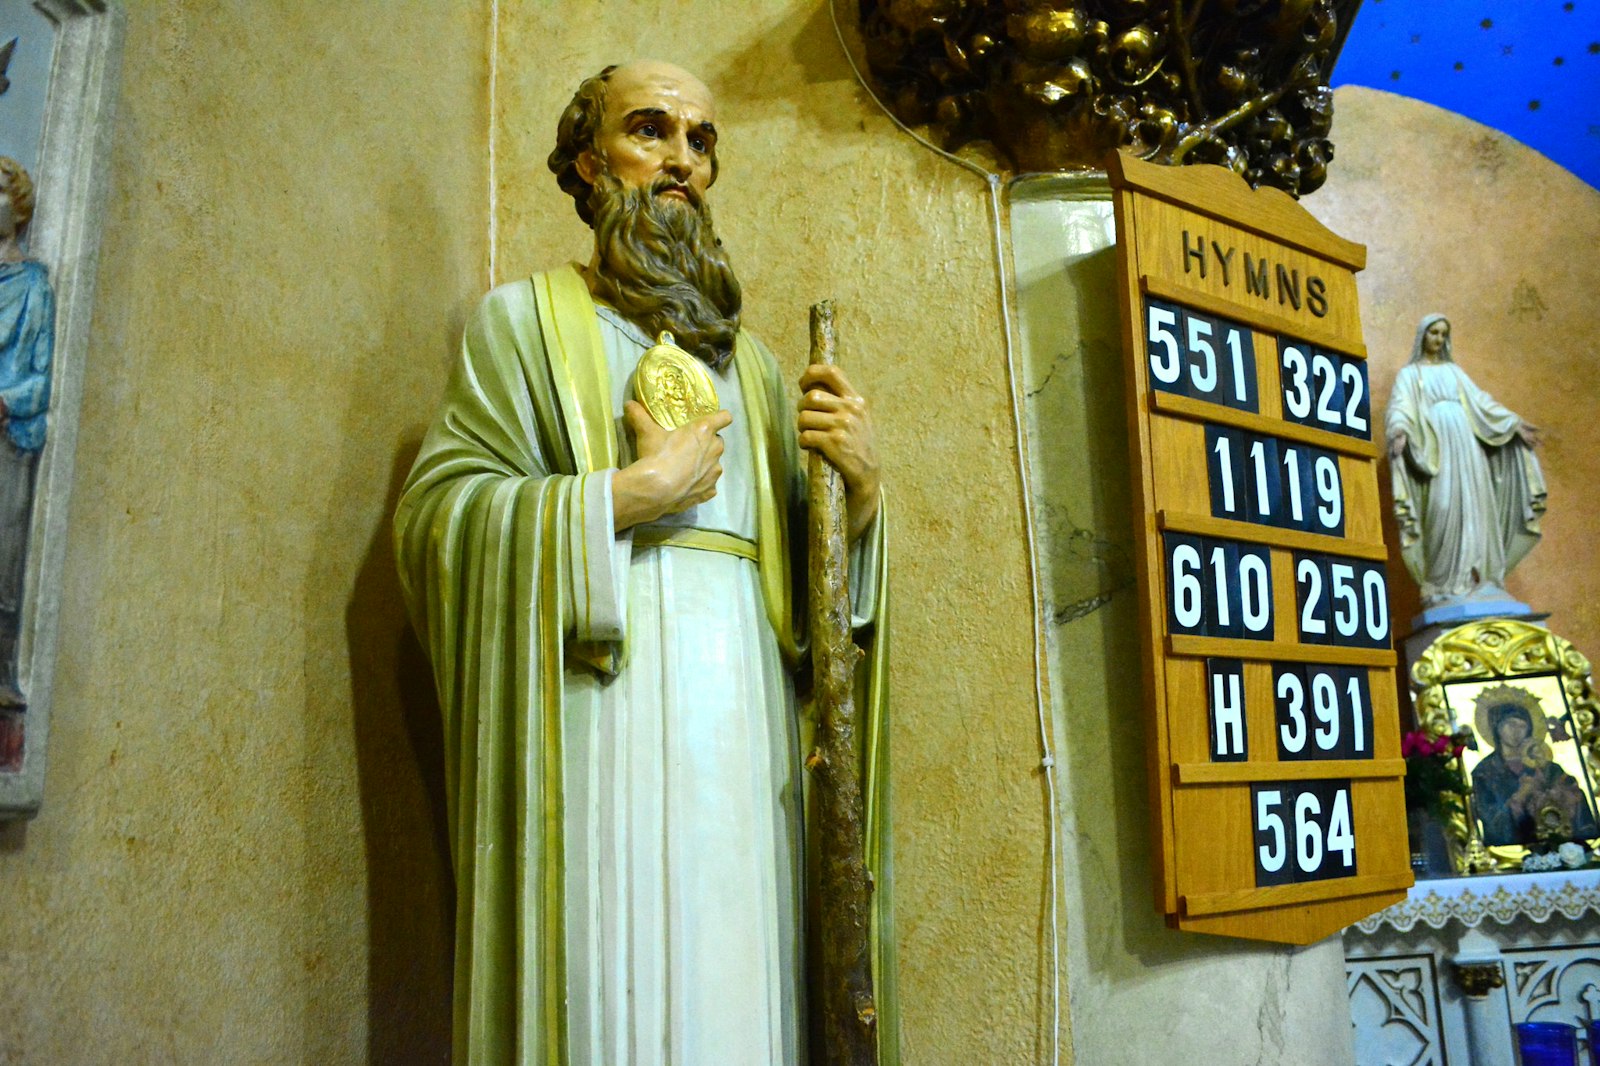 A statue of St. Jude containing a relic of the apostle is pictured at Immaculate Conception Parish in Lapeer in this 2015 file photo. The statue is believed to be the same one actor Danny Thomas prayed before as he implored St. Jude's help during a difficult period in his life. Thomas later went on to found St. Jude Children's Research Hospital in gratitude for the saint's intercession. (Michael Stechschulte | Detroit Catholic)